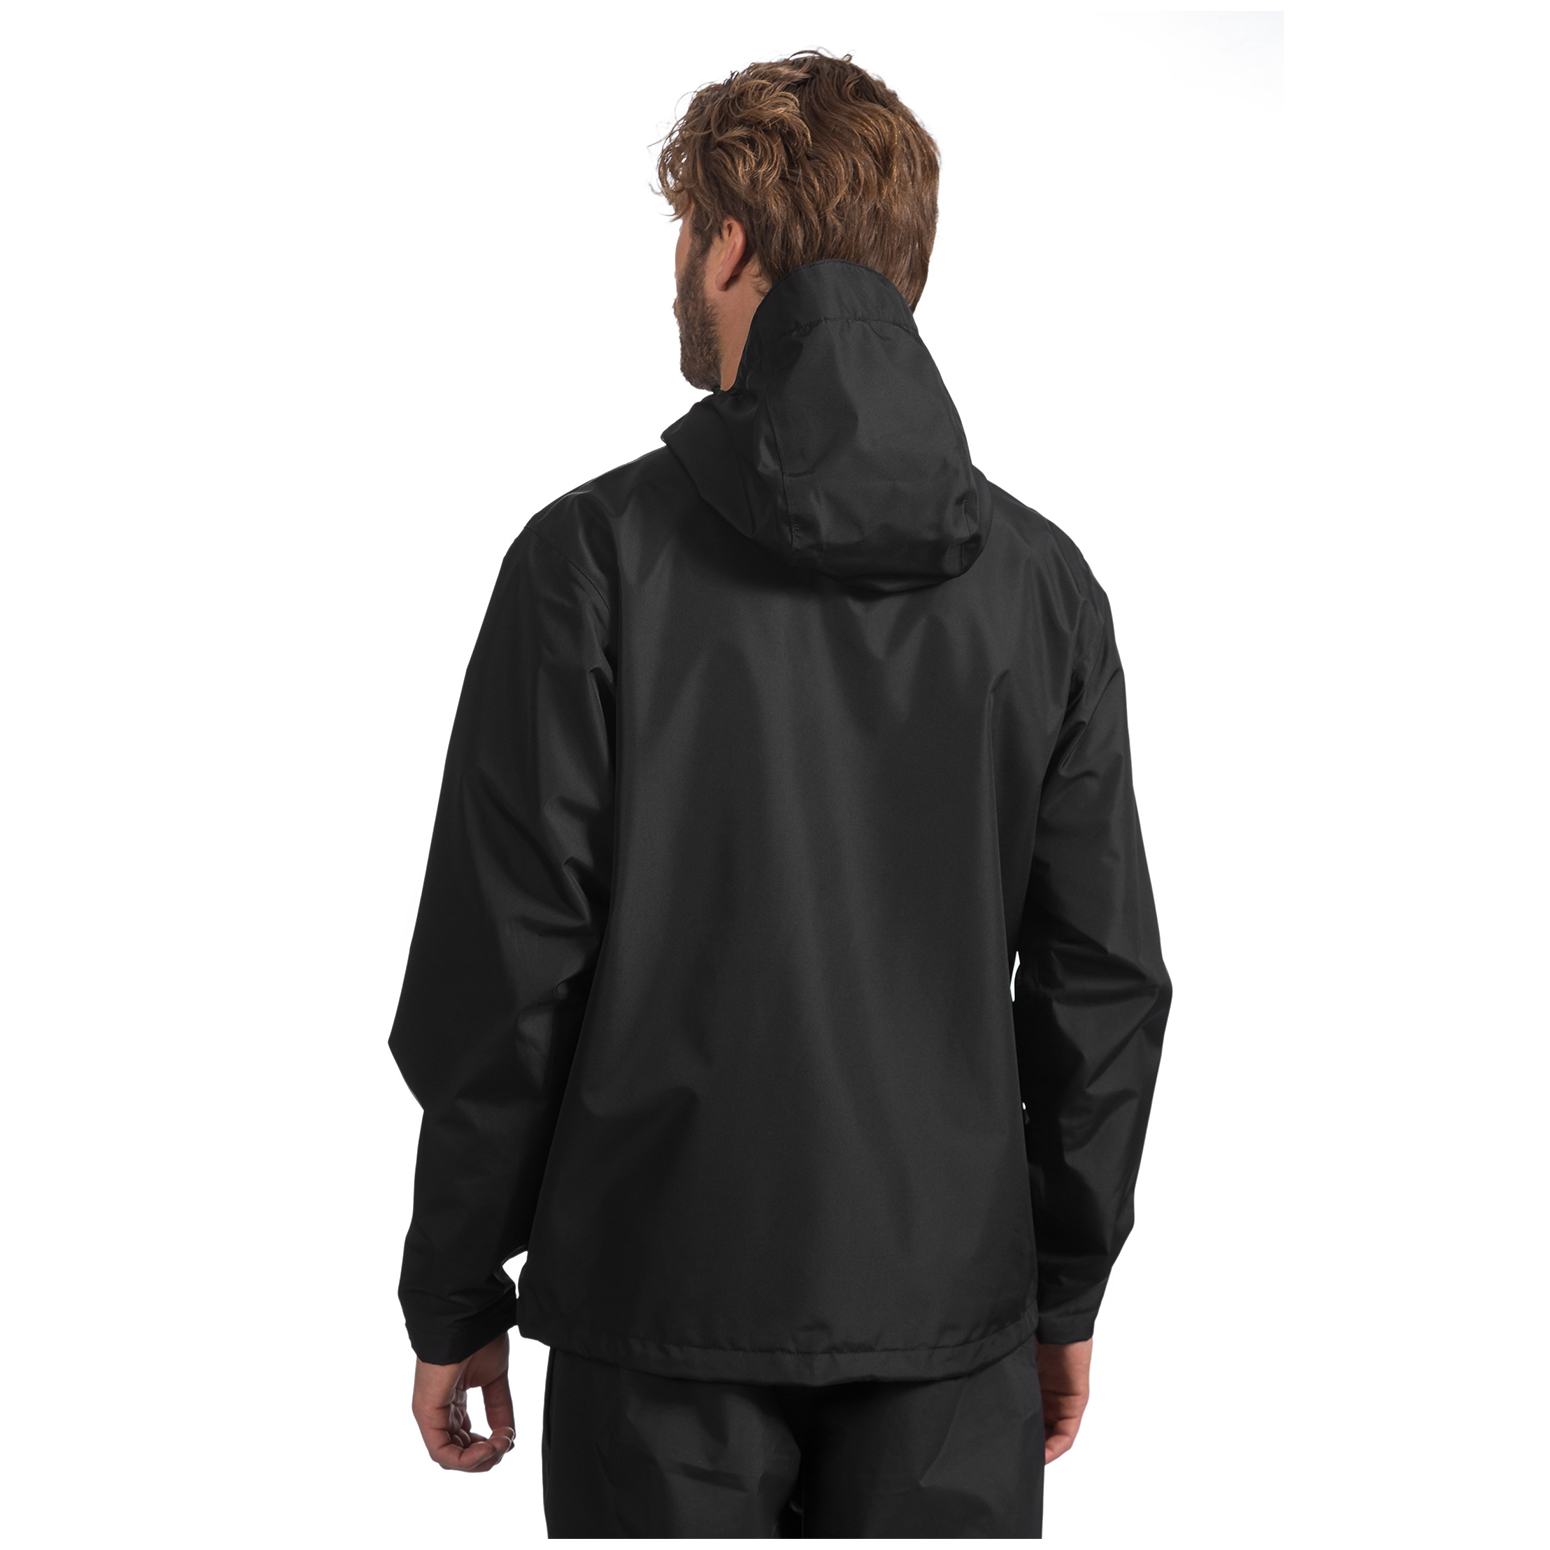 Cabela's Rain Swept Jacket with 4MOST REPEL for Men